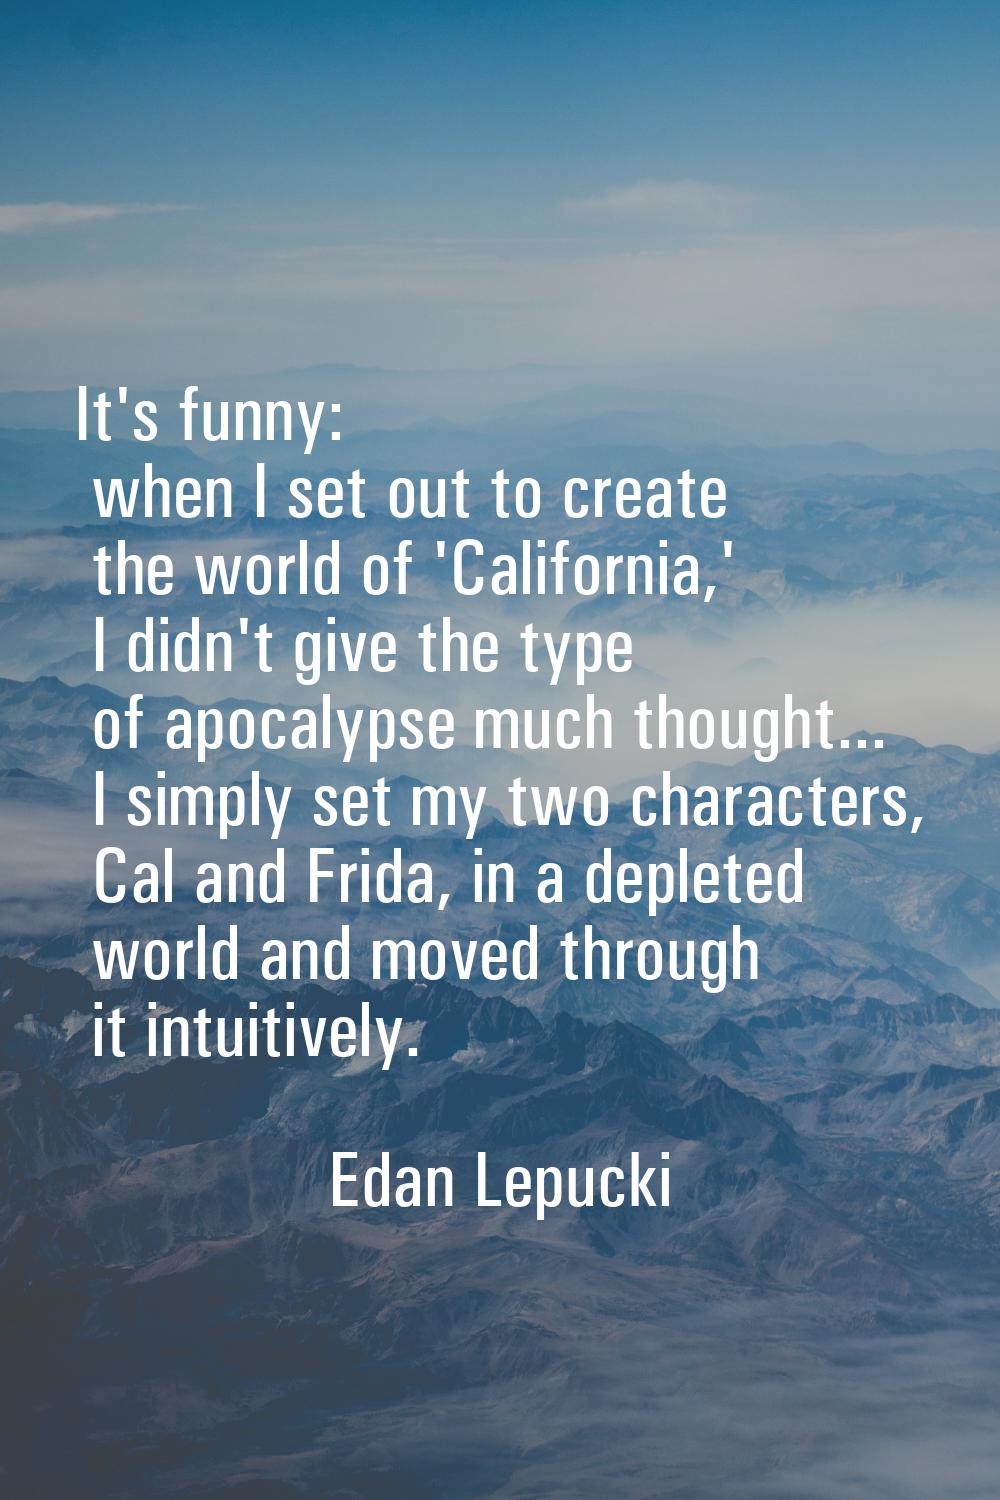 It's funny: when I set out to create the world of 'California,' I didn't give the type of apocalyps